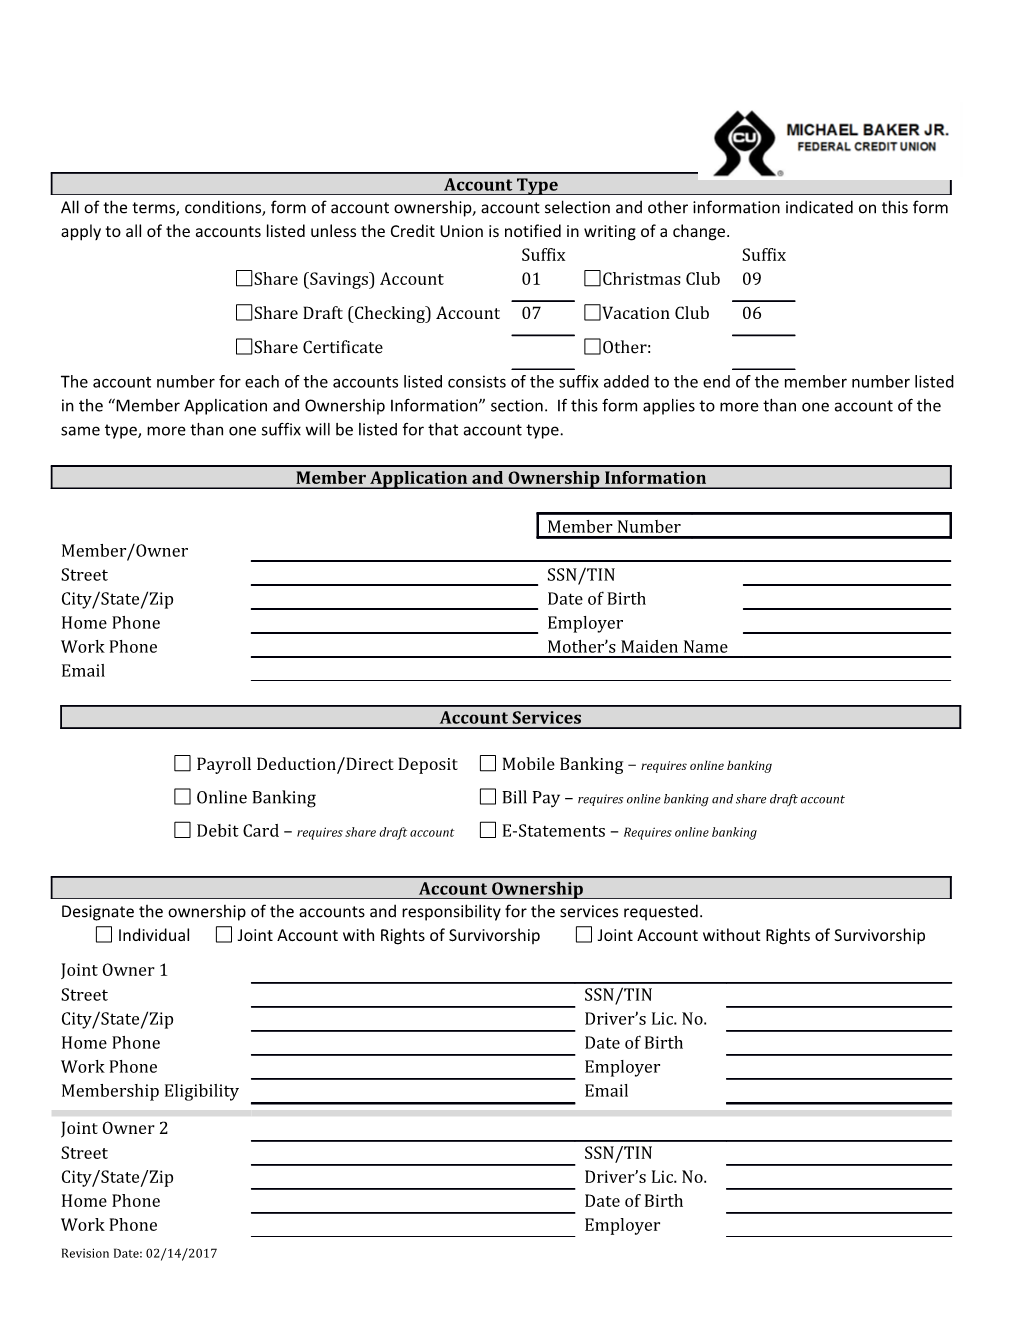 Application for Additional Services